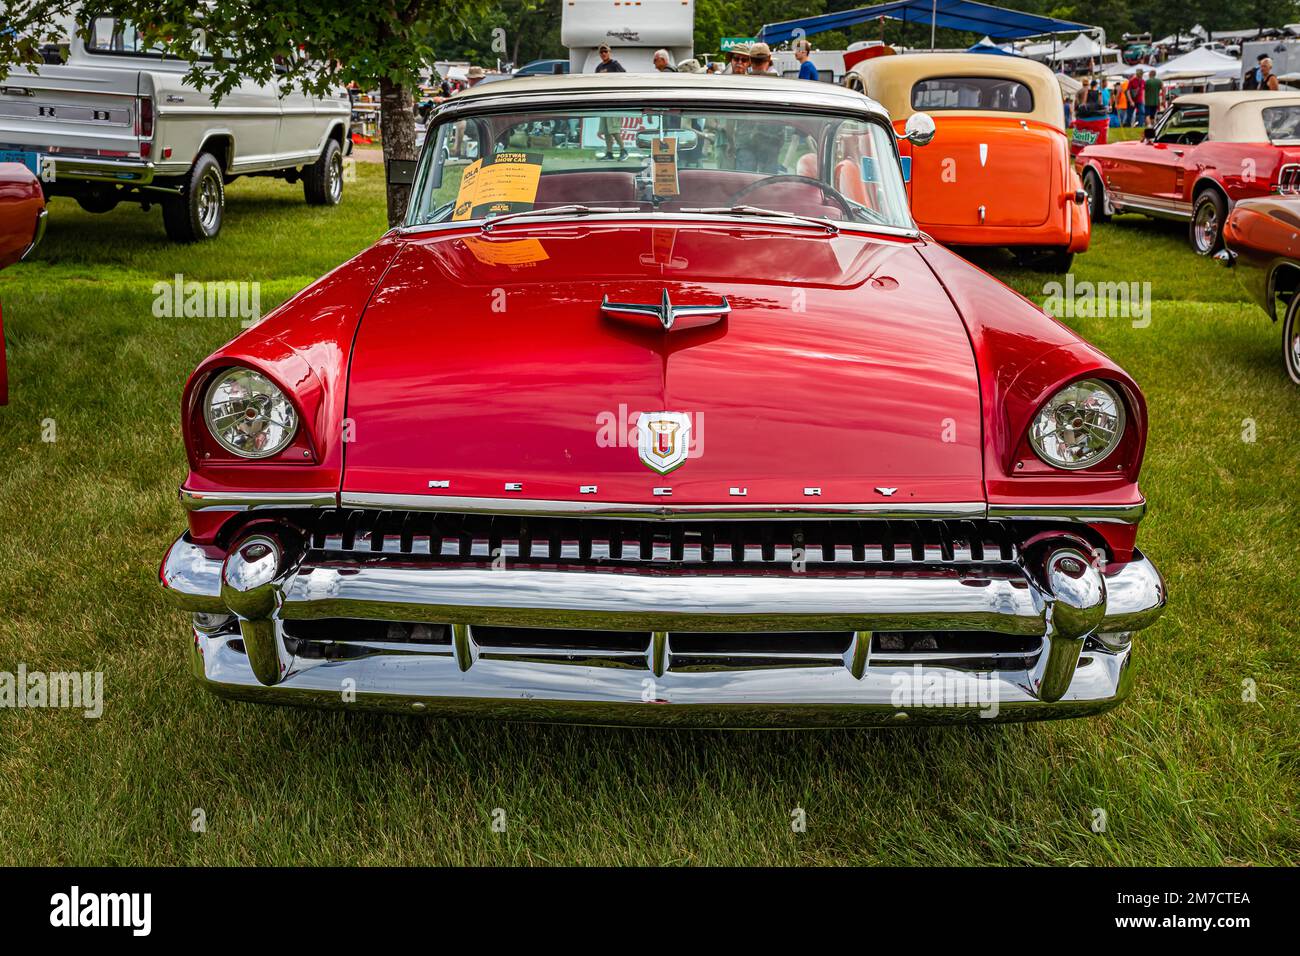 Iola, WI - July 07, 2022: High perspective front view of a 1955 Mercury Montclair Hardtop Coupe at a local car show. Stock Photo